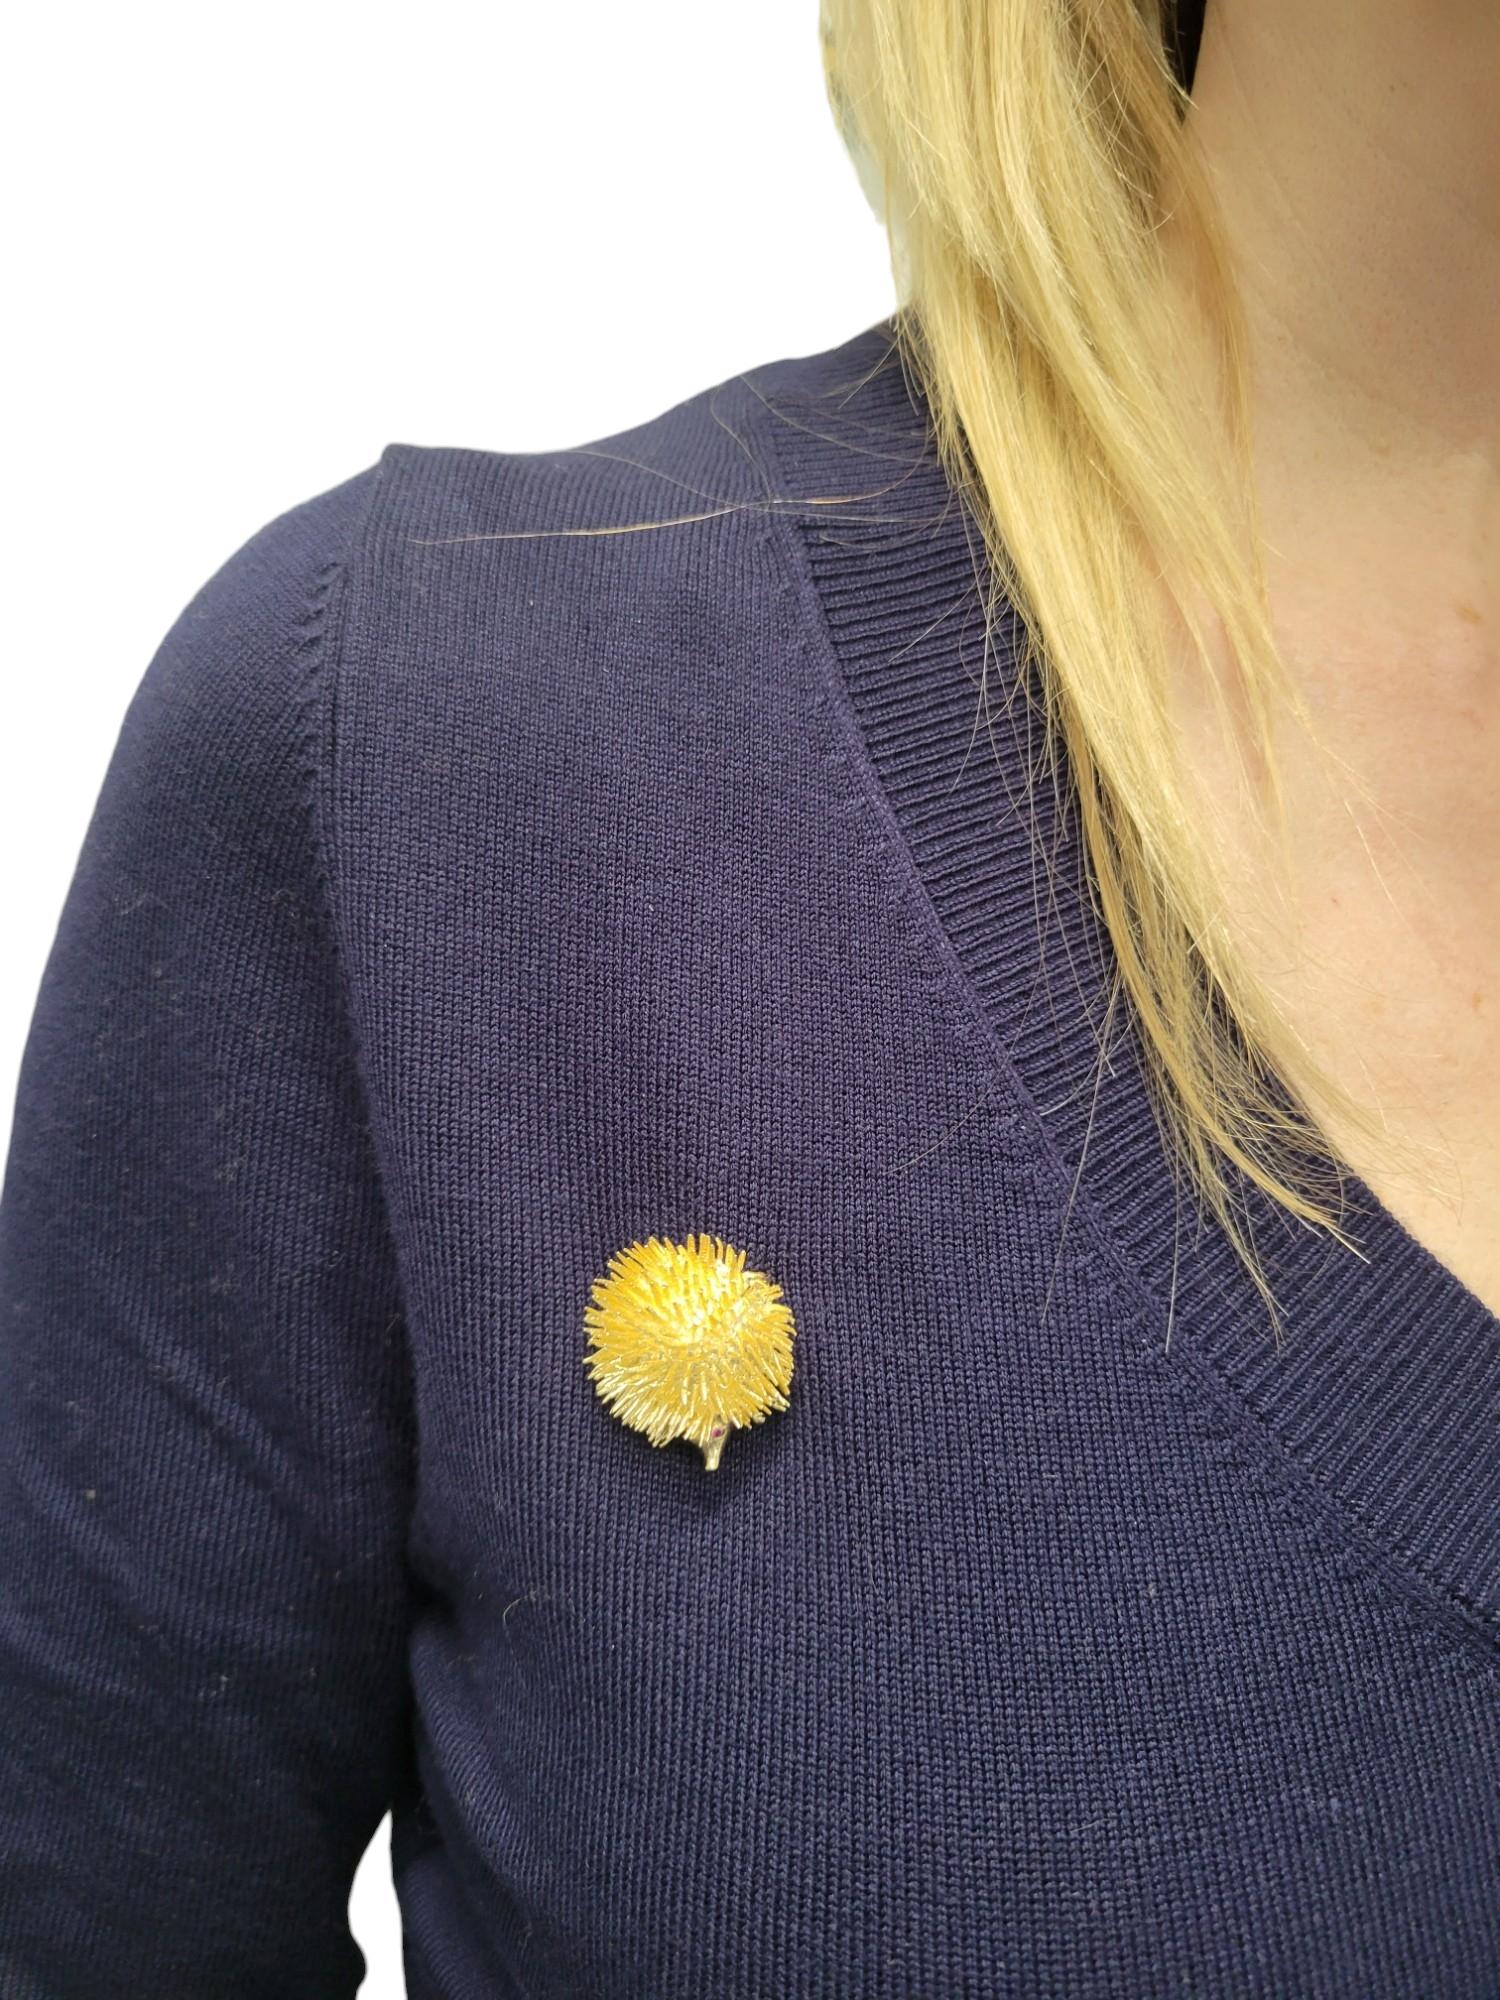 Spiky Round Hedgehog Brooch with Ruby Eyes Set in 14 Karat Yellow Gold For Sale 2